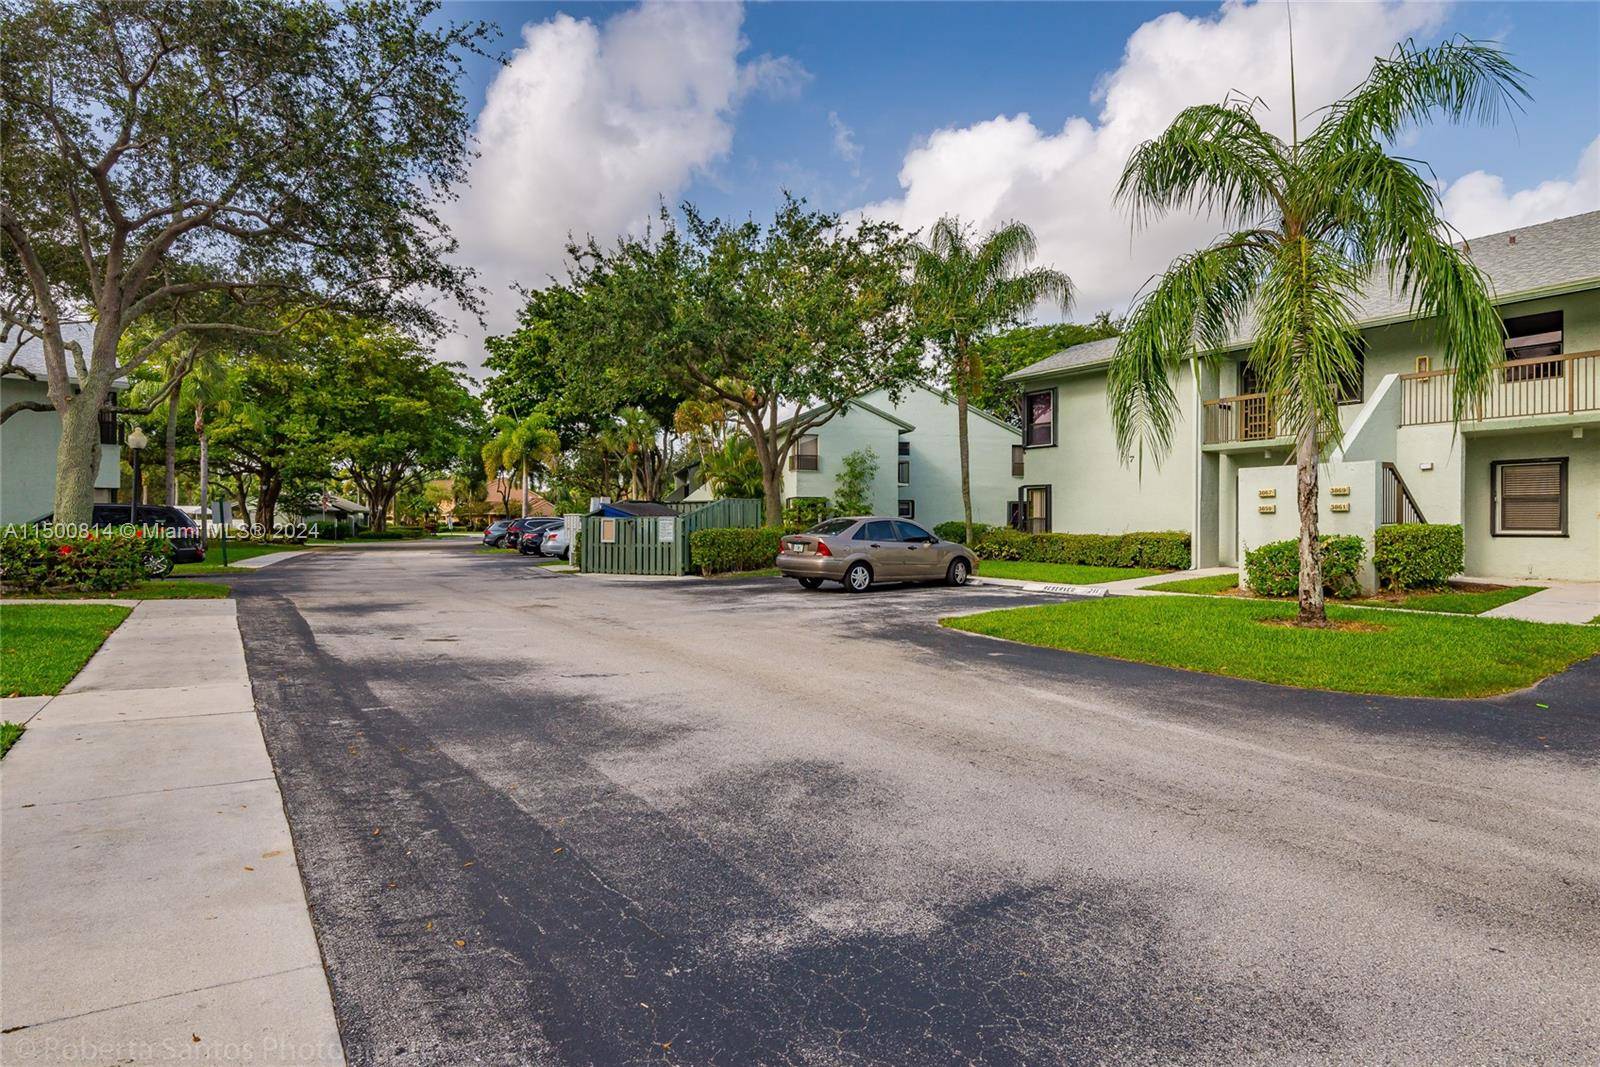 Welcome to this fabulous unit located in the heart of Coconut Creek with access just a few minutes from shopping centers and main avenues and highways.